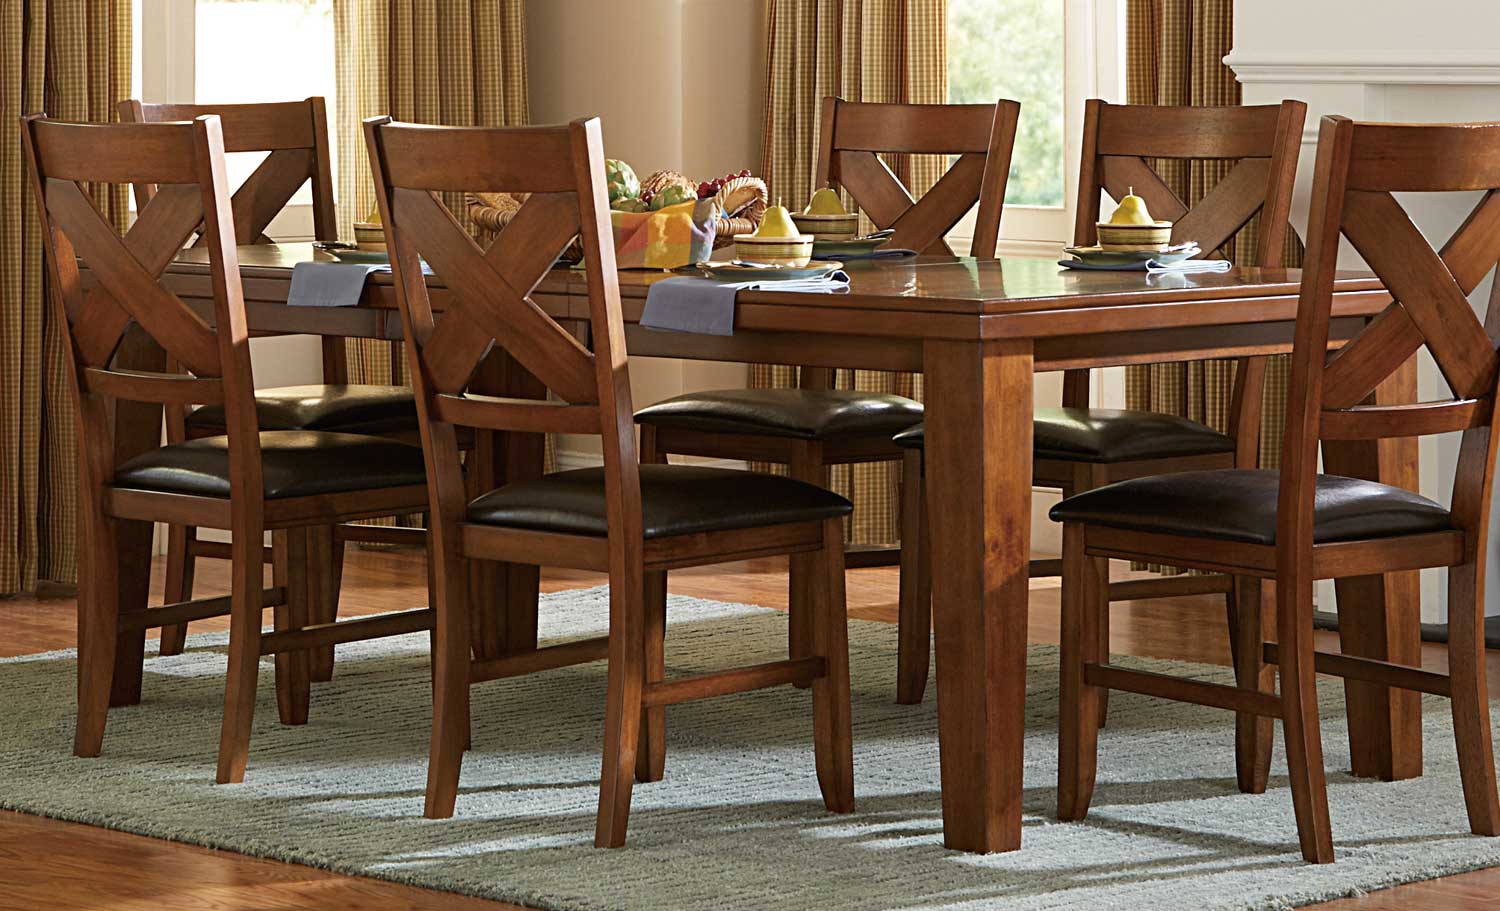 Homelegance Silverton Dining Table - Warm Brown Cherry